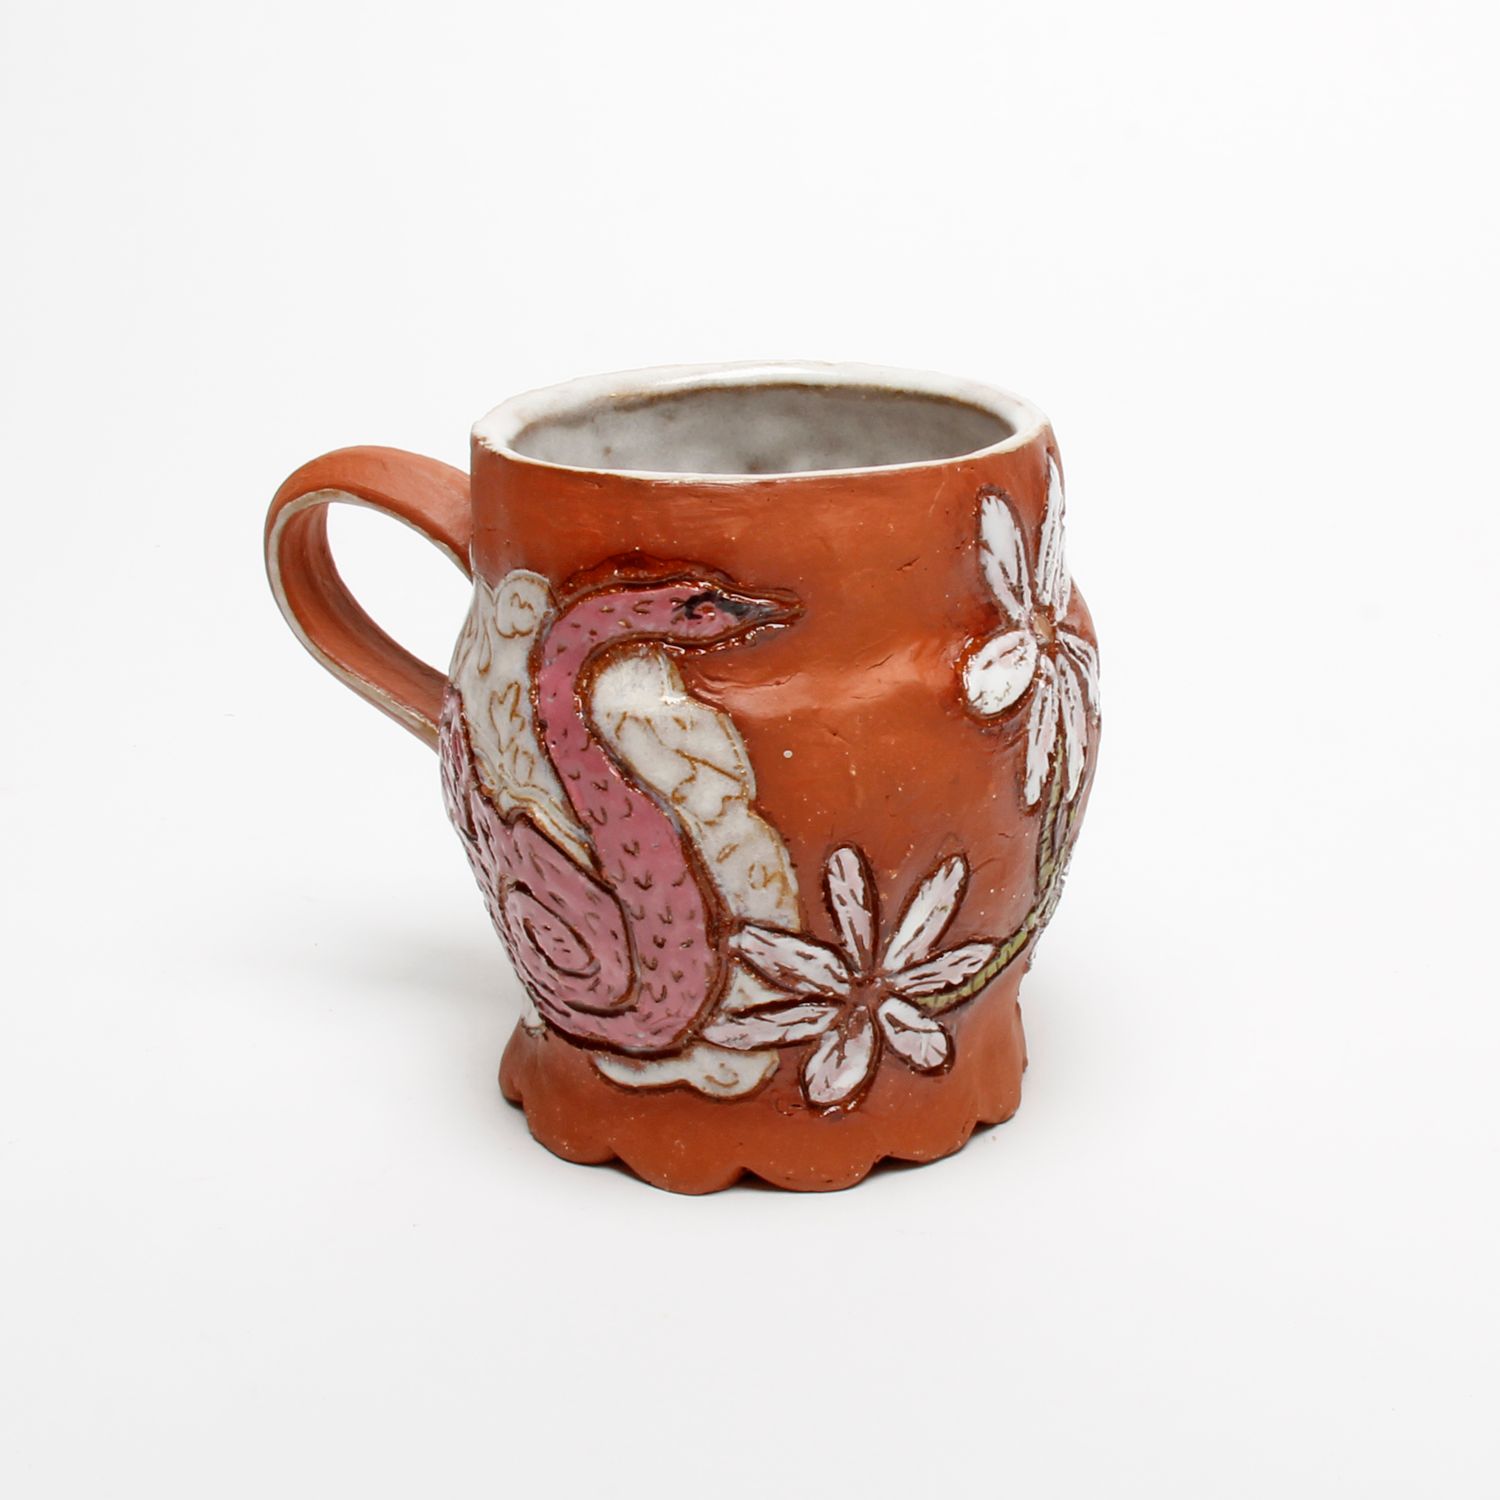 Zoë Pinnell: Tall Mug – Assorted Motifs Product Image 4 of 6